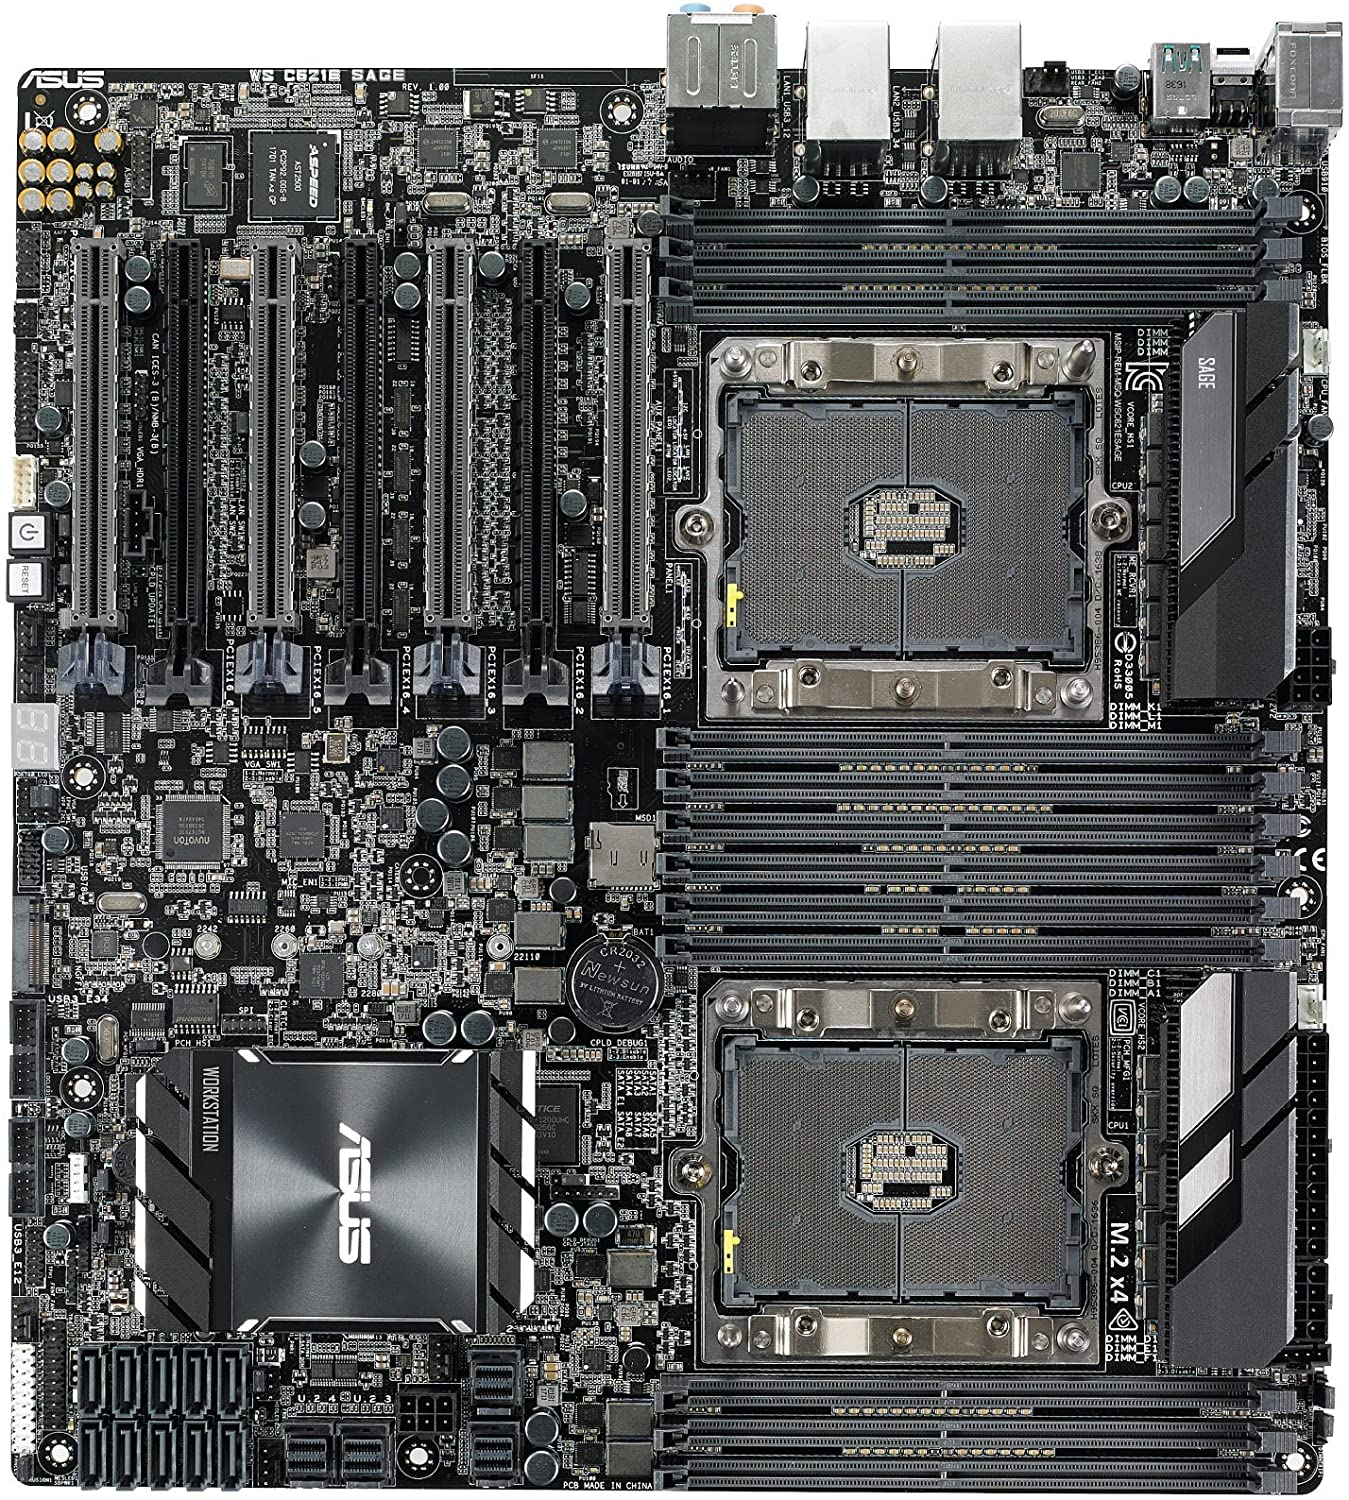 ASUS Professional-grade motherboard with 12 RAM slots